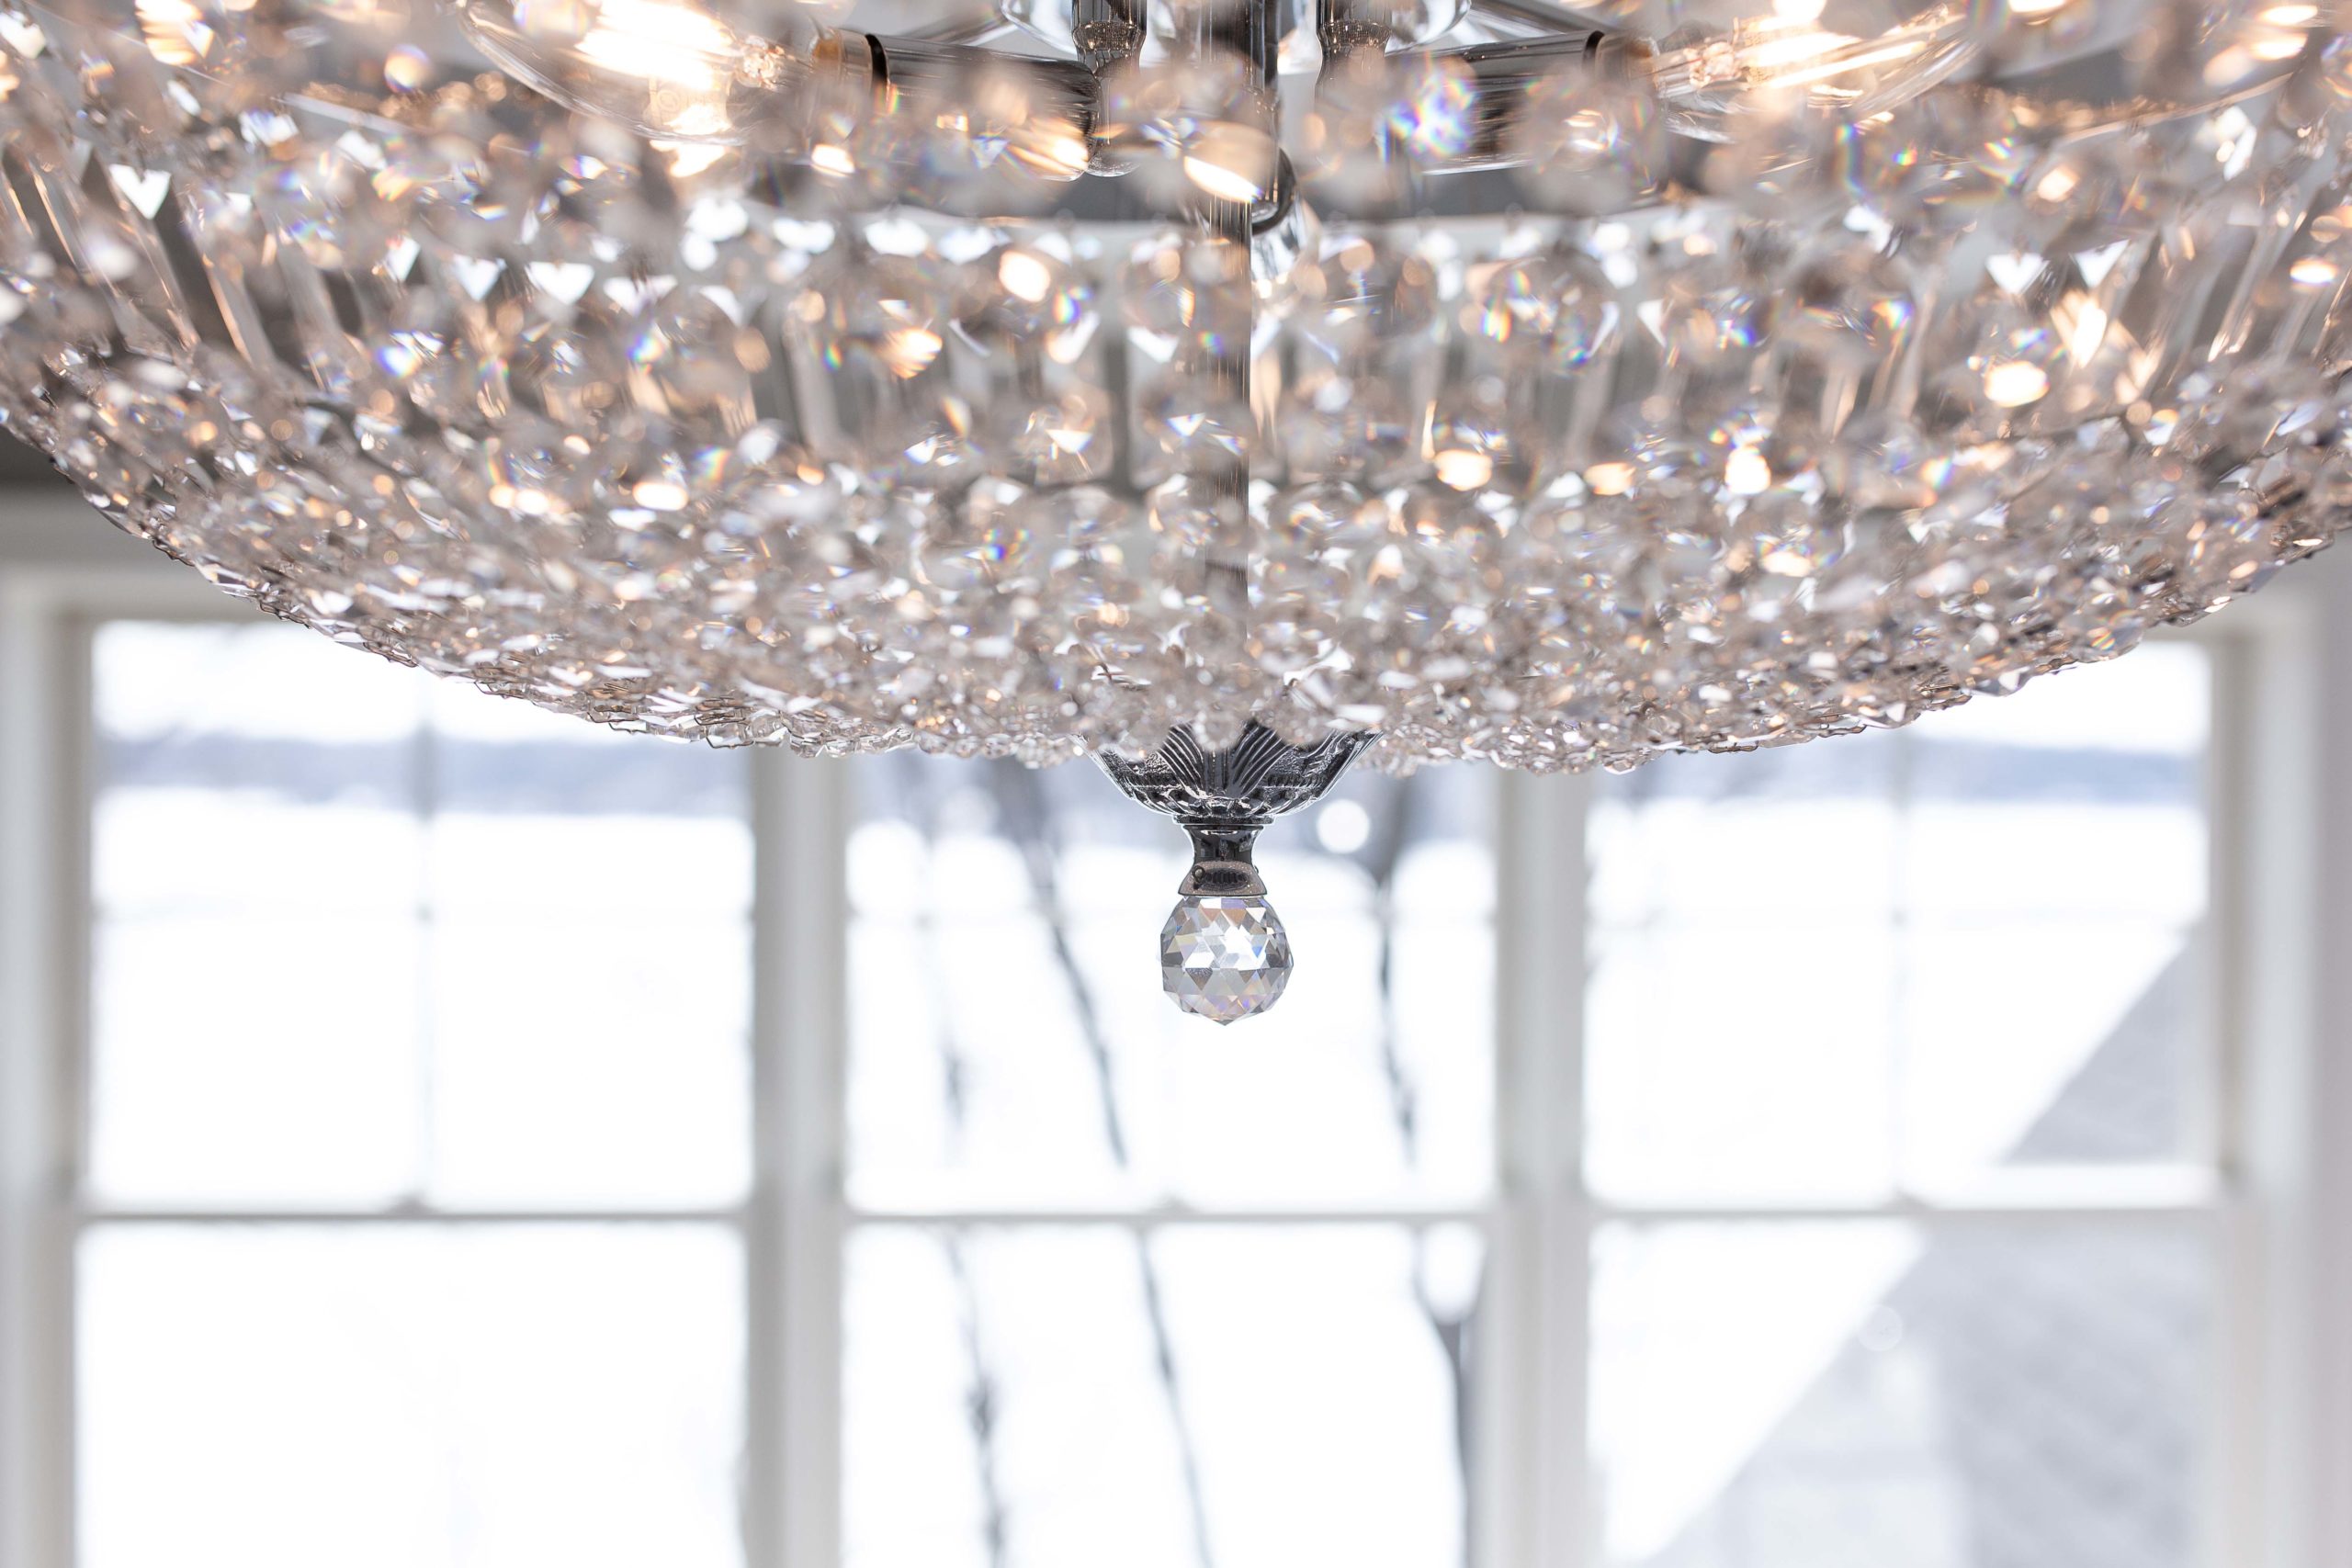 A large crystal chandelier hangs above a window.